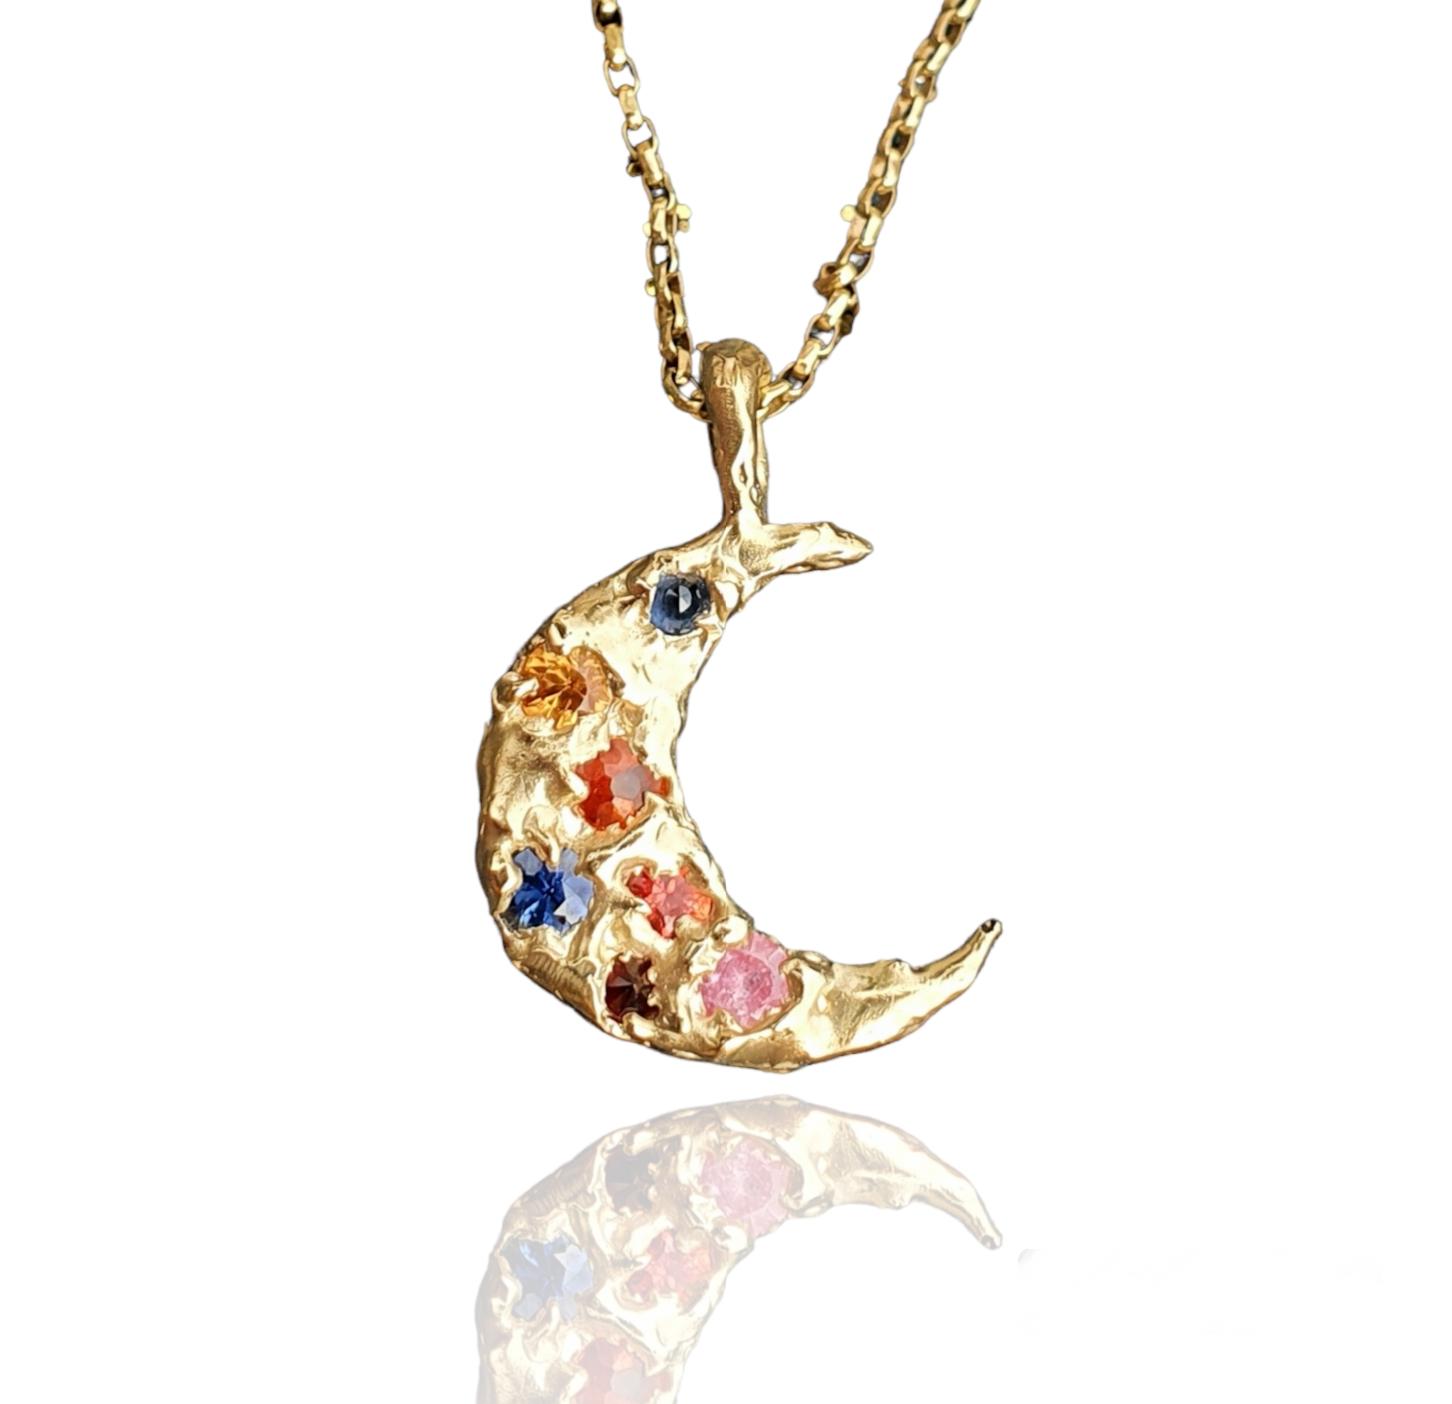 Moon Child Eri - Gold, ruby and sapphire pendant necklace